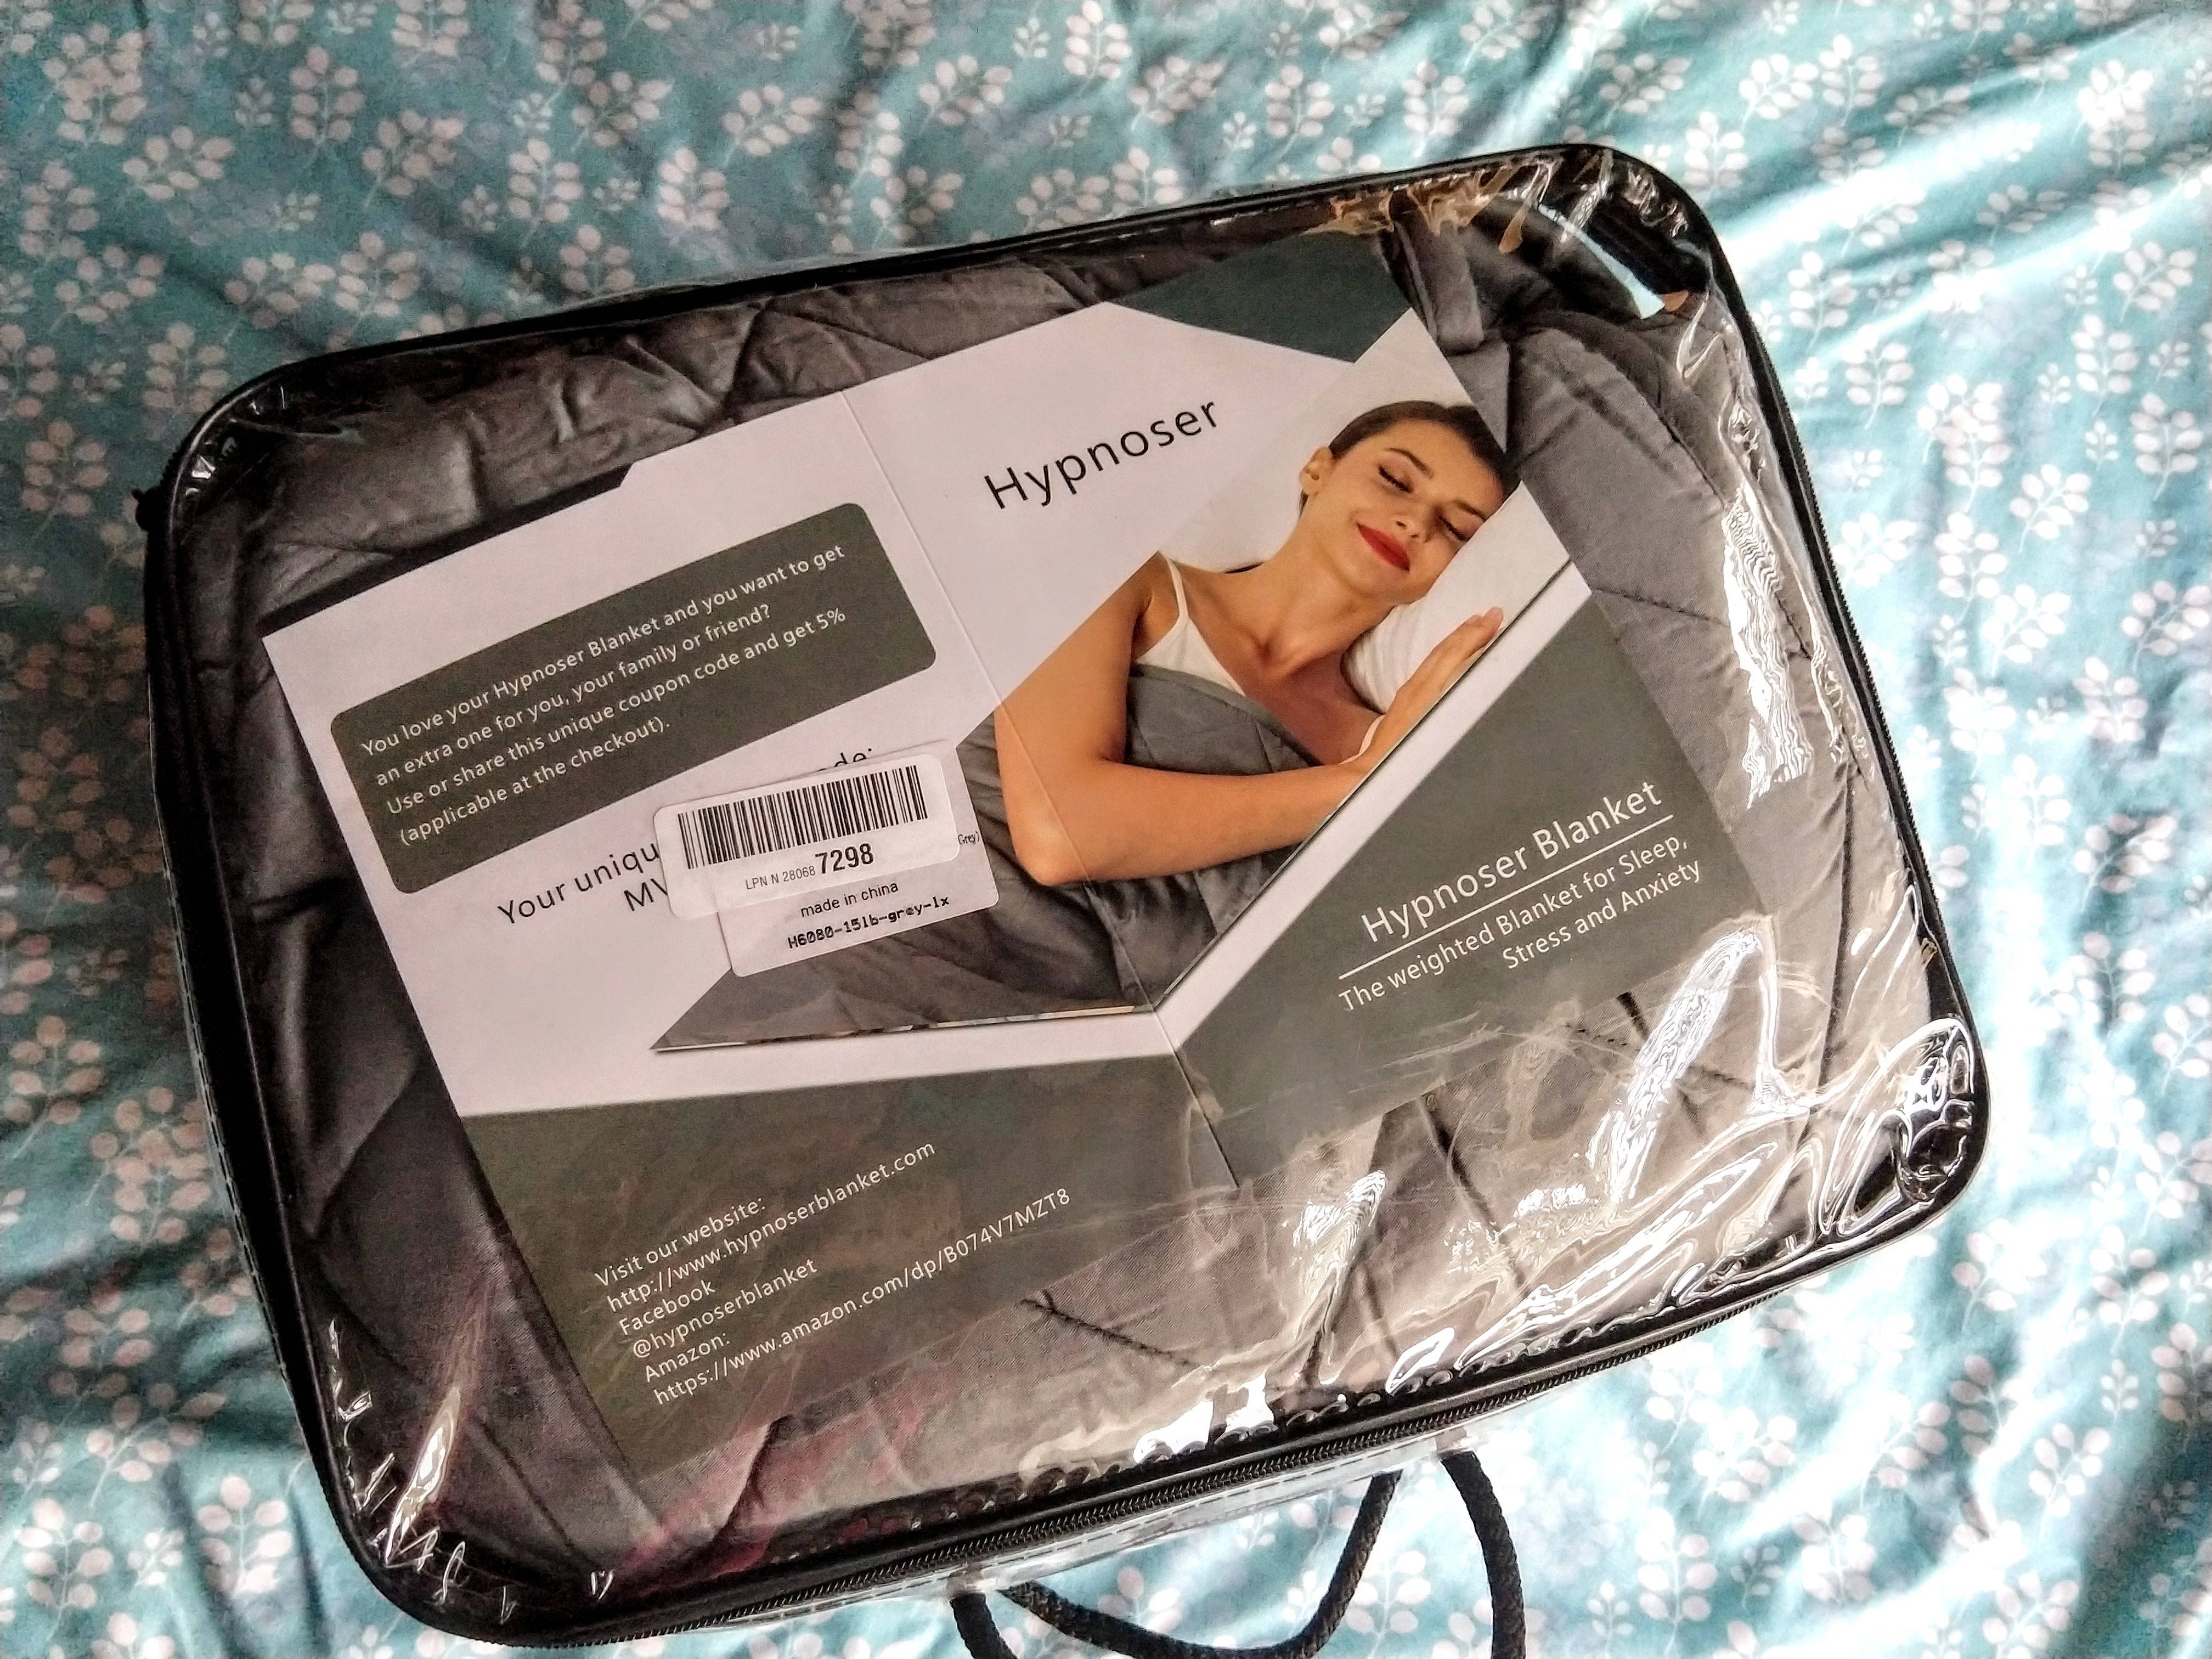 Hypnoser Weighted Blanket Review - The Sleep Judge